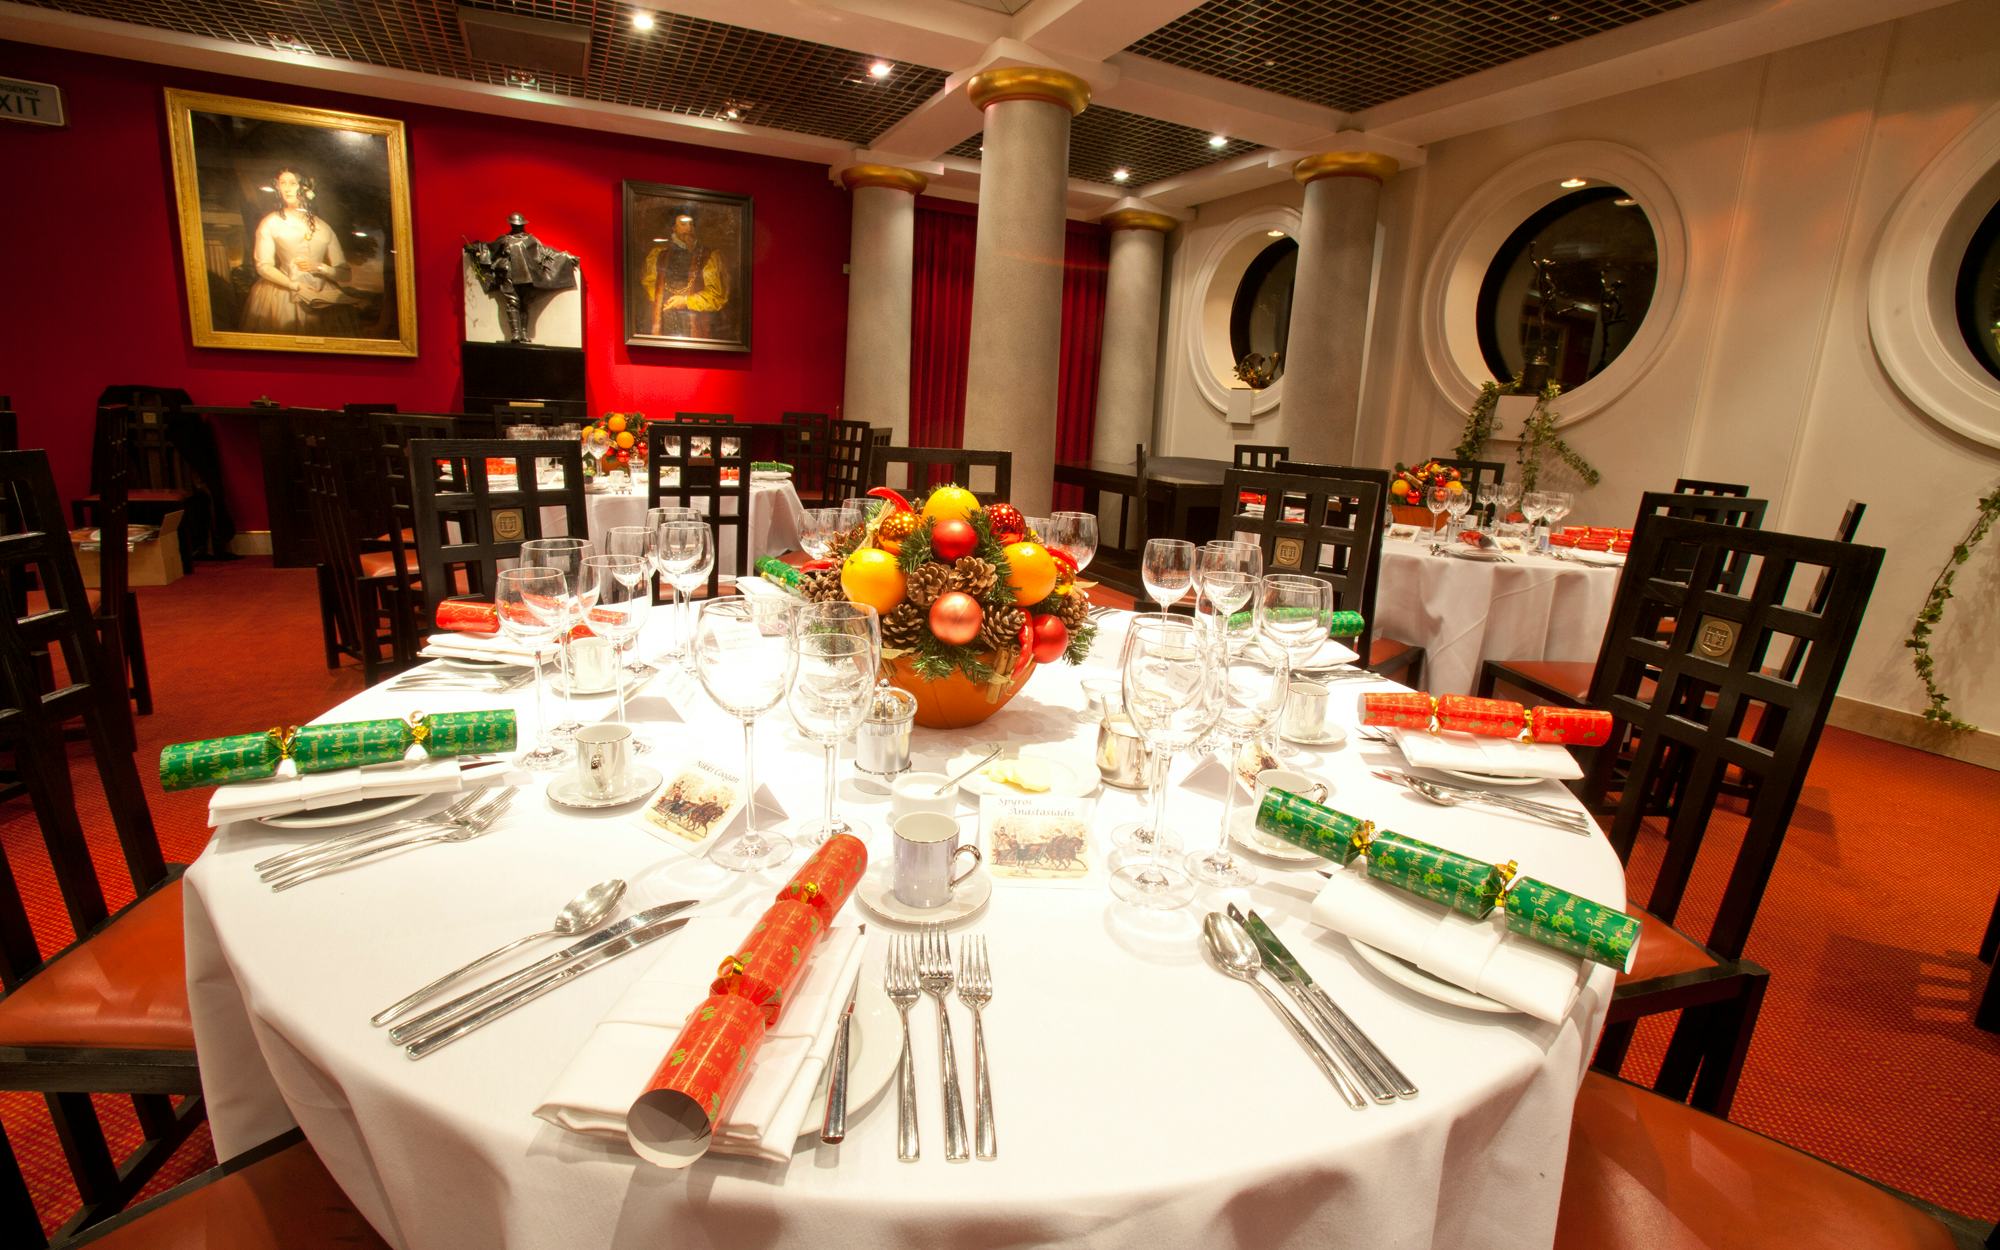 Founders Hall venues events london christmas festive private hire dining